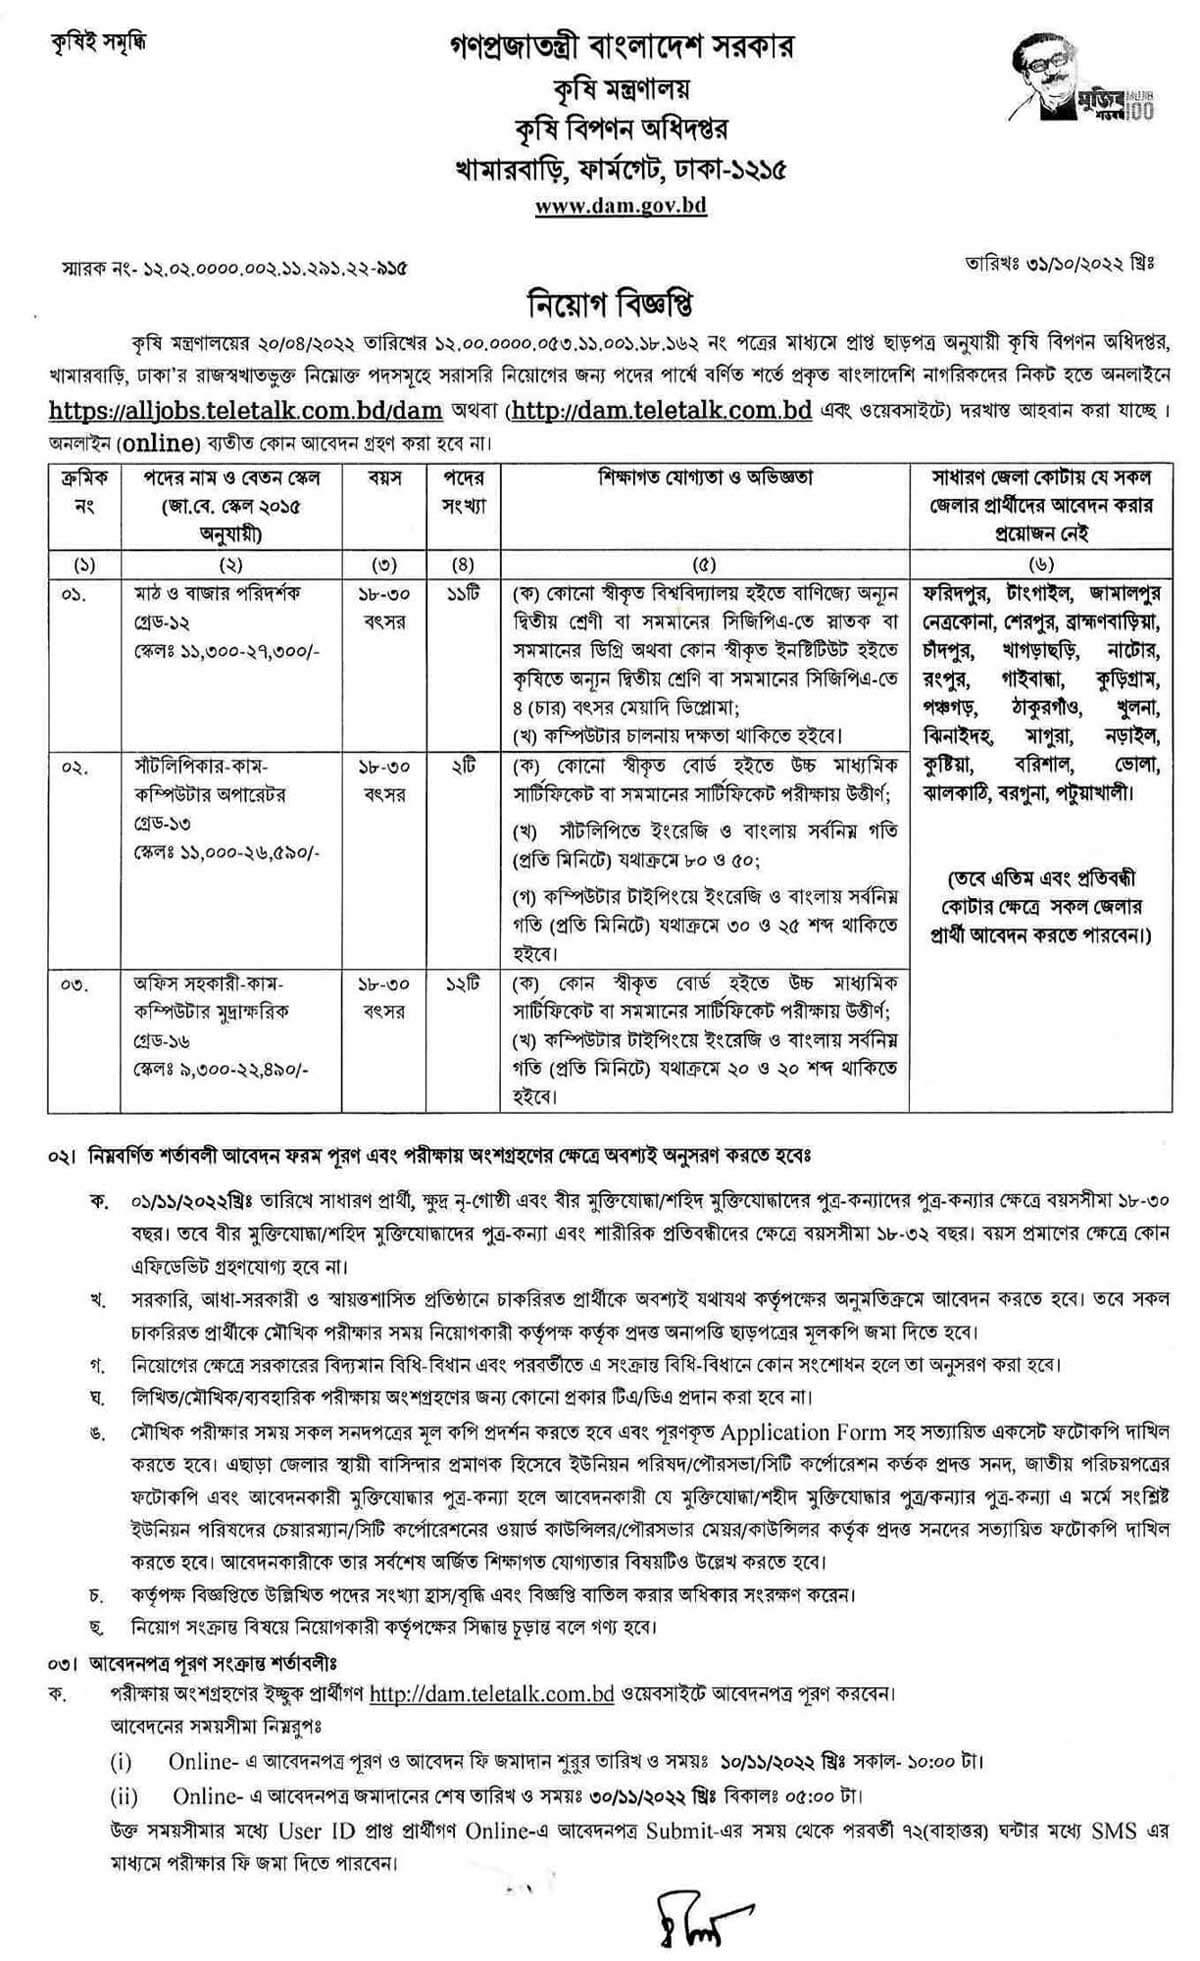 Ministry of Agriculture Job Circular 2022